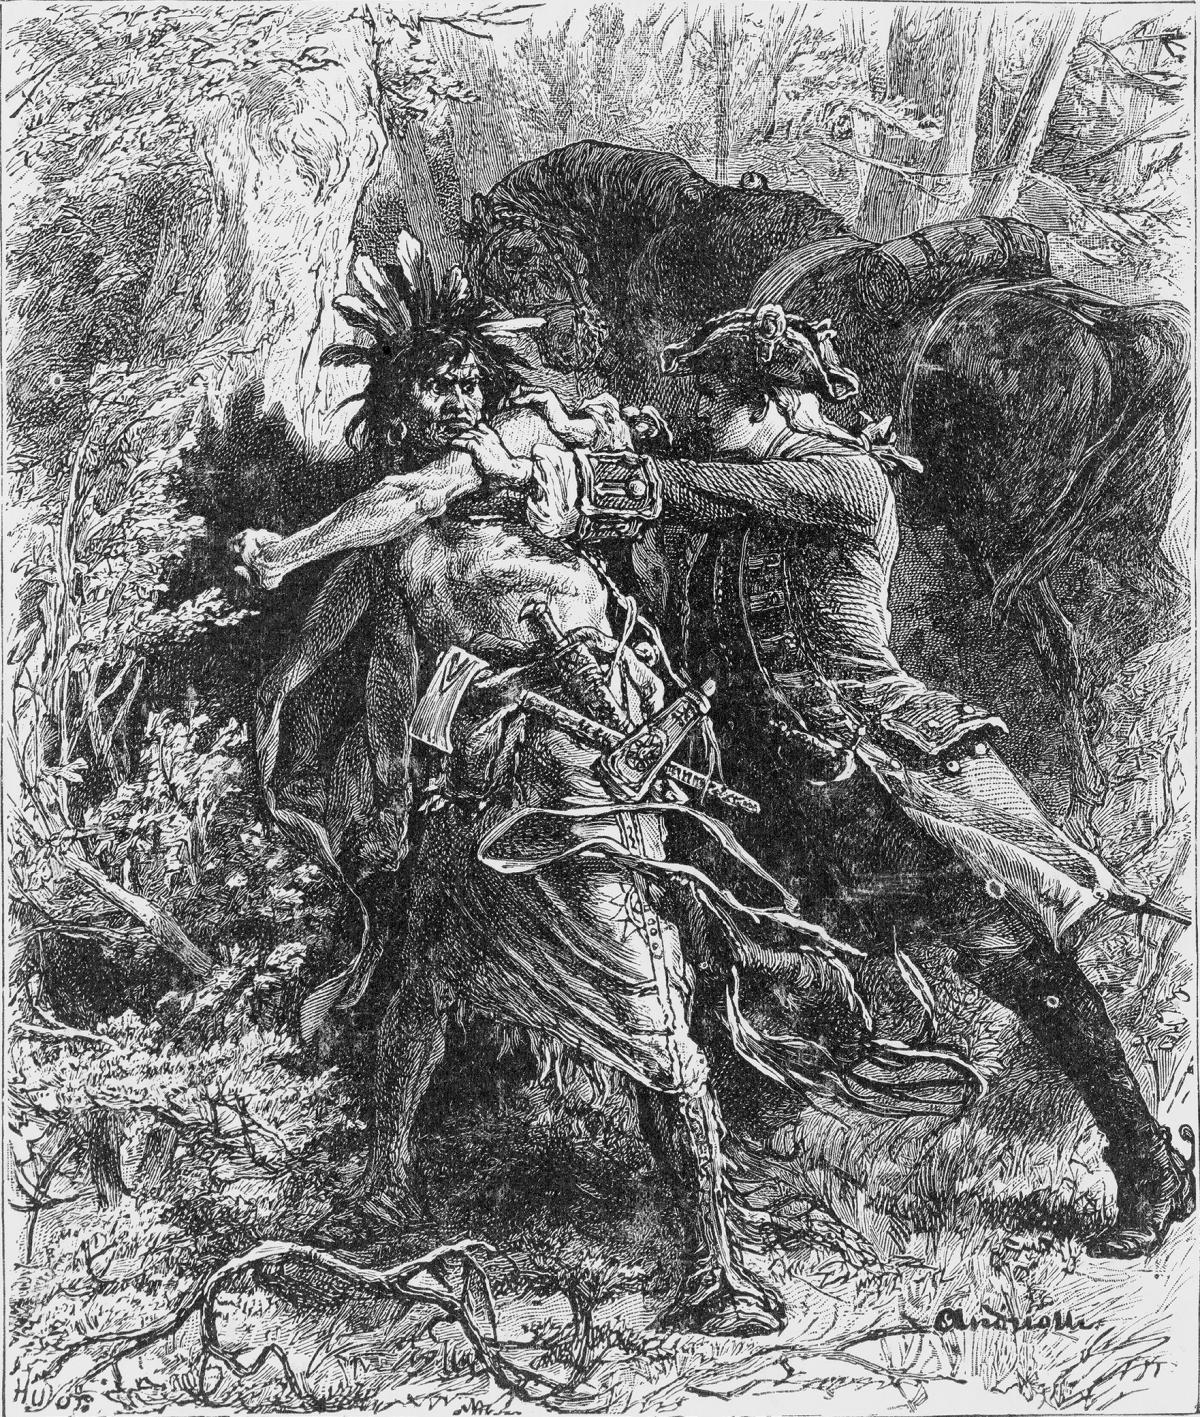 Black and white illustration of a militiaman fighting hand-to-hand with a Mohawk warrior in the deep forest